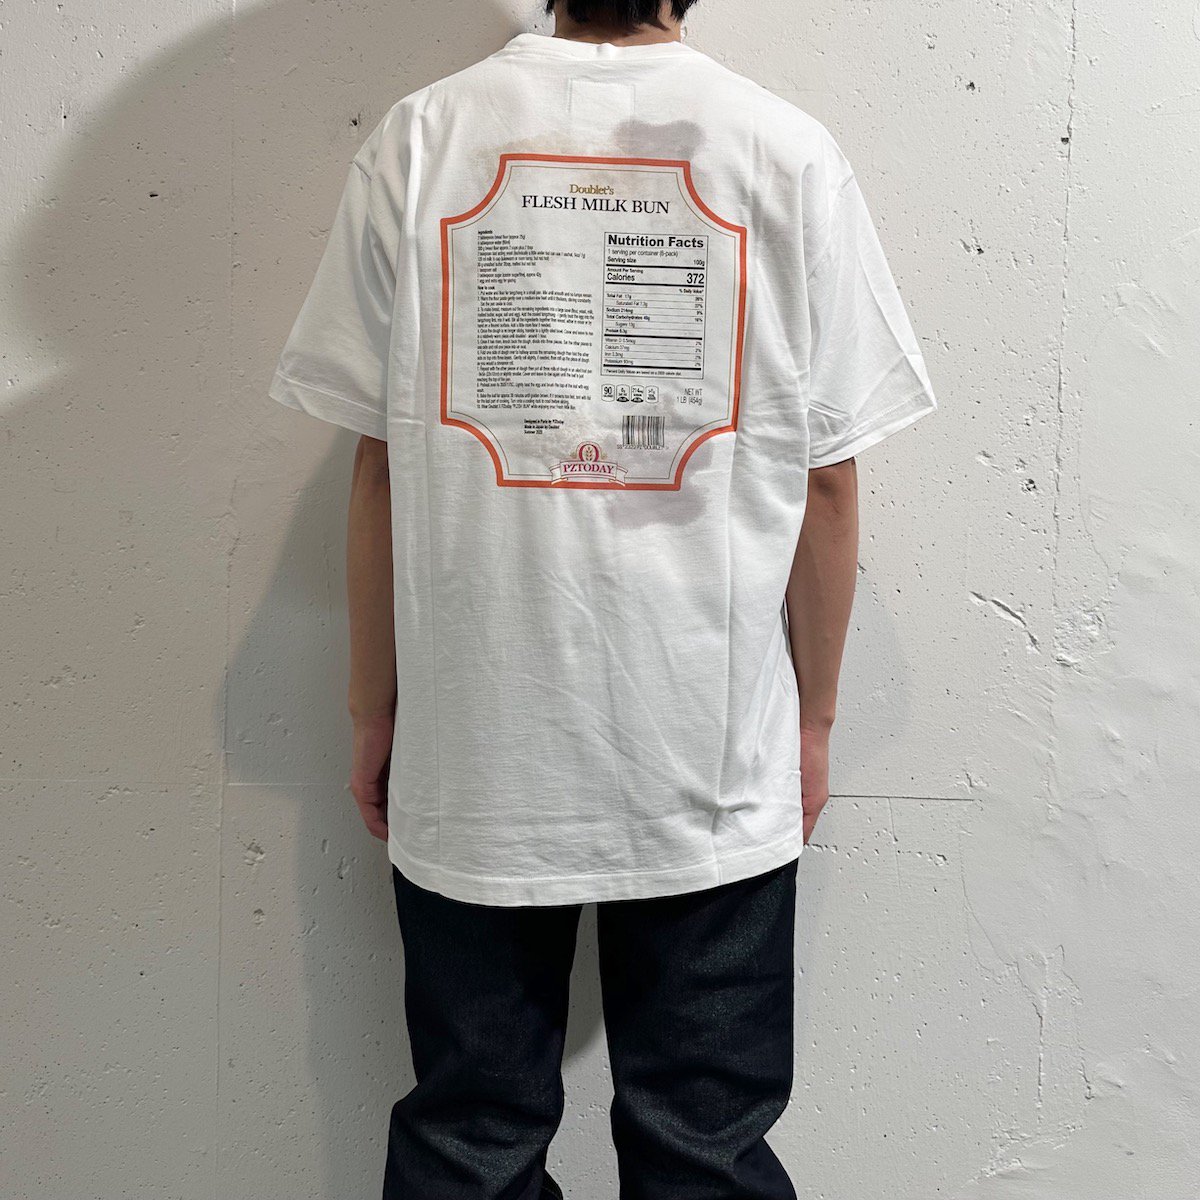 doublet / BREAD PRINTED T-SHIRT-doubletの通販EQUAL